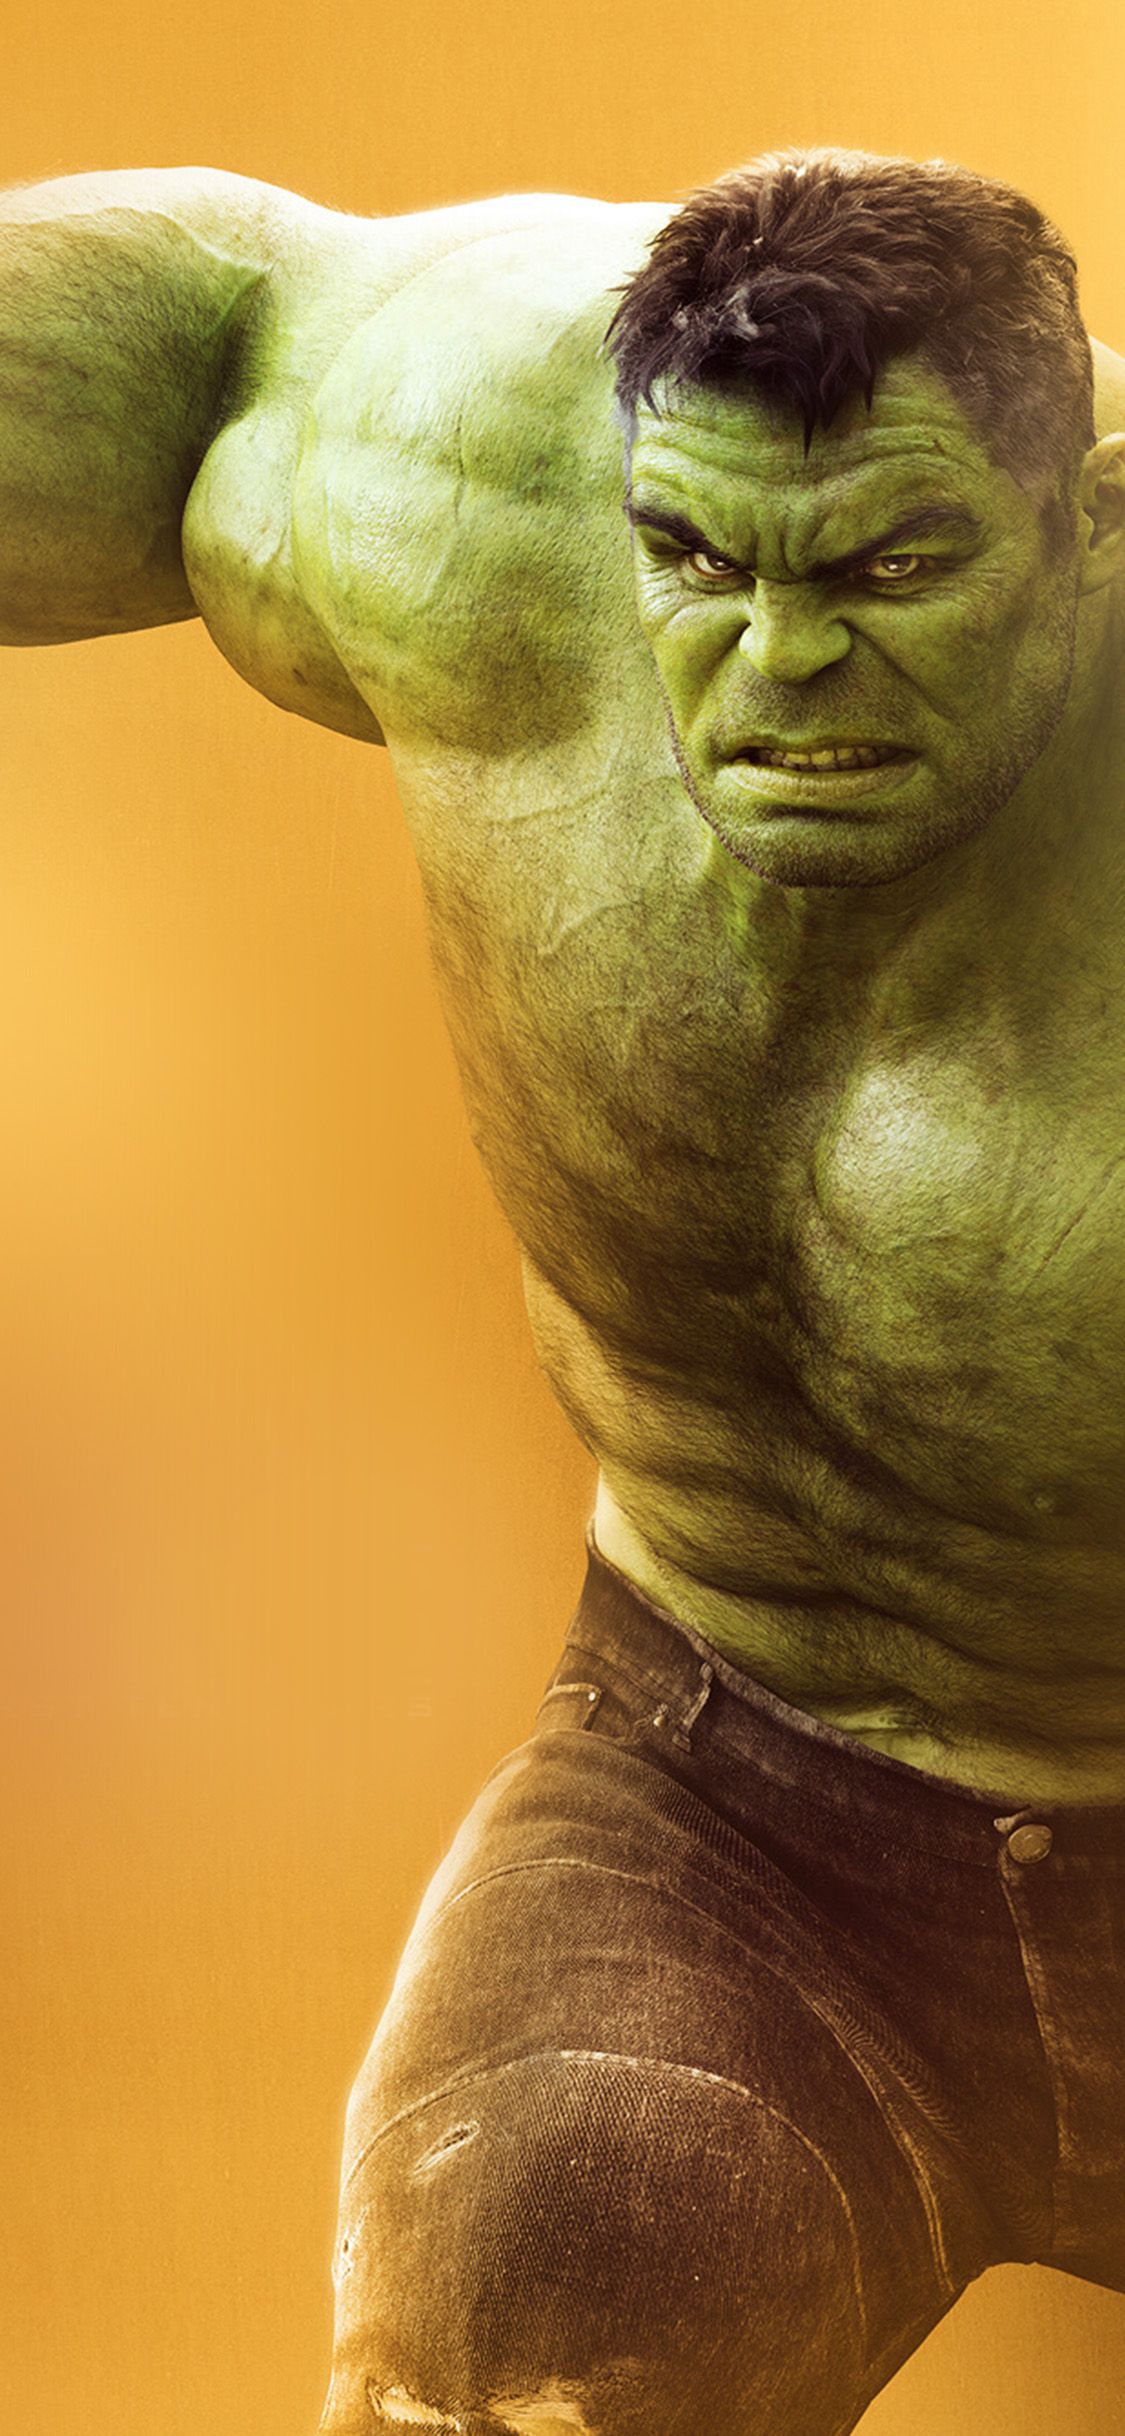 54+ Hulk Wallpapers: HD, 4K, 5K for PC and Mobile | Download free images  for iPhone, Android